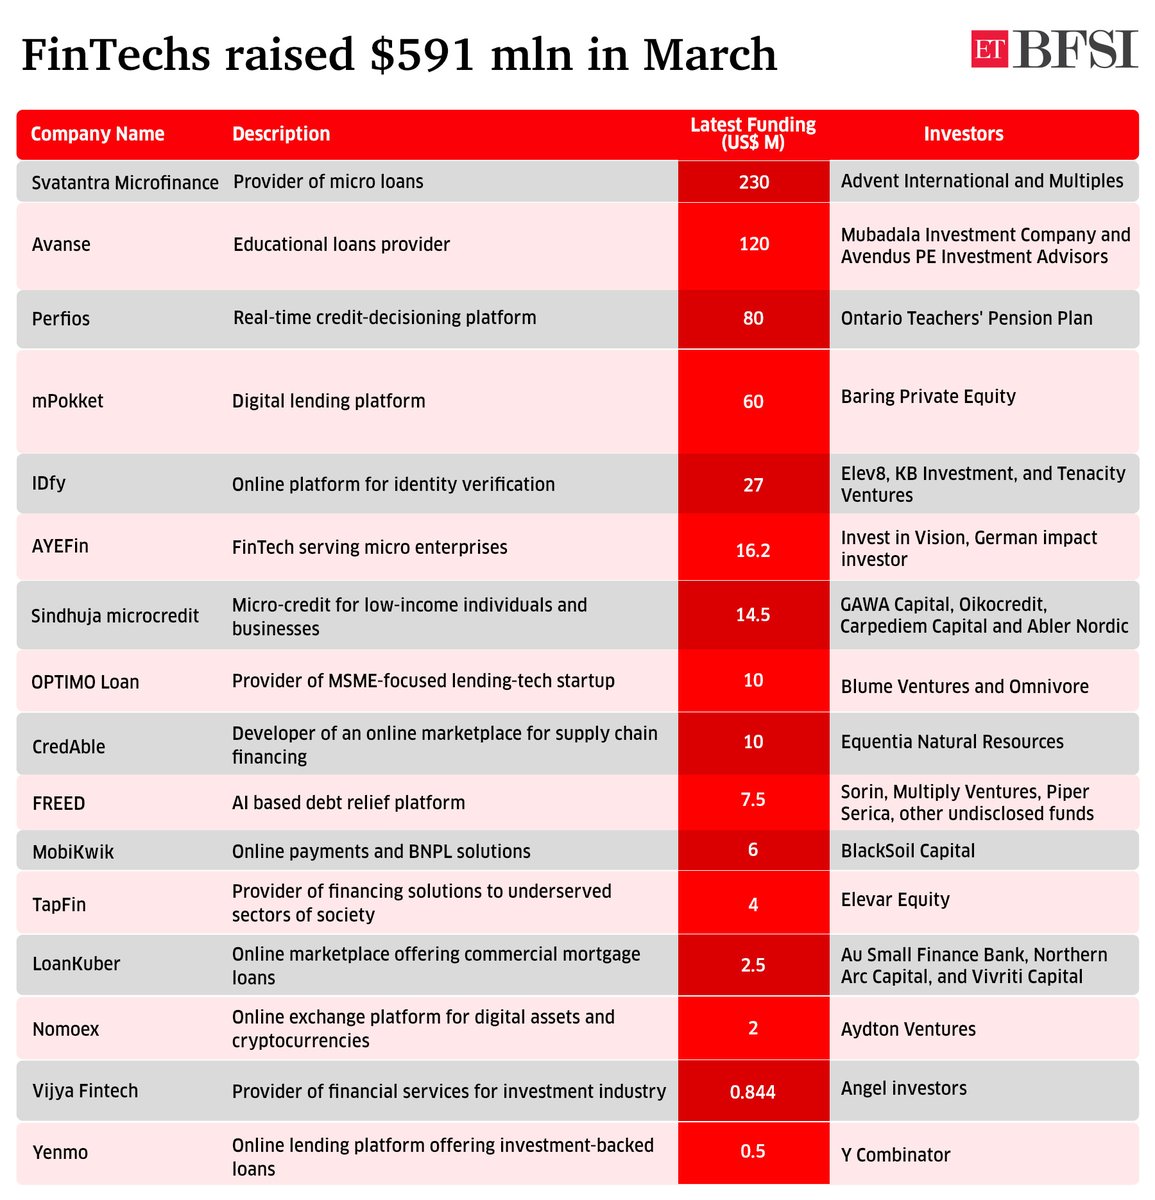 FinTech Funding March 2024: Total $591 mn raised by Indian Fintechs Read more at: bfsi.economictimes.indiatimes.com/news/fintech/f… #FinTechs #FinTechFunding #fundingwinter #startups #march2024